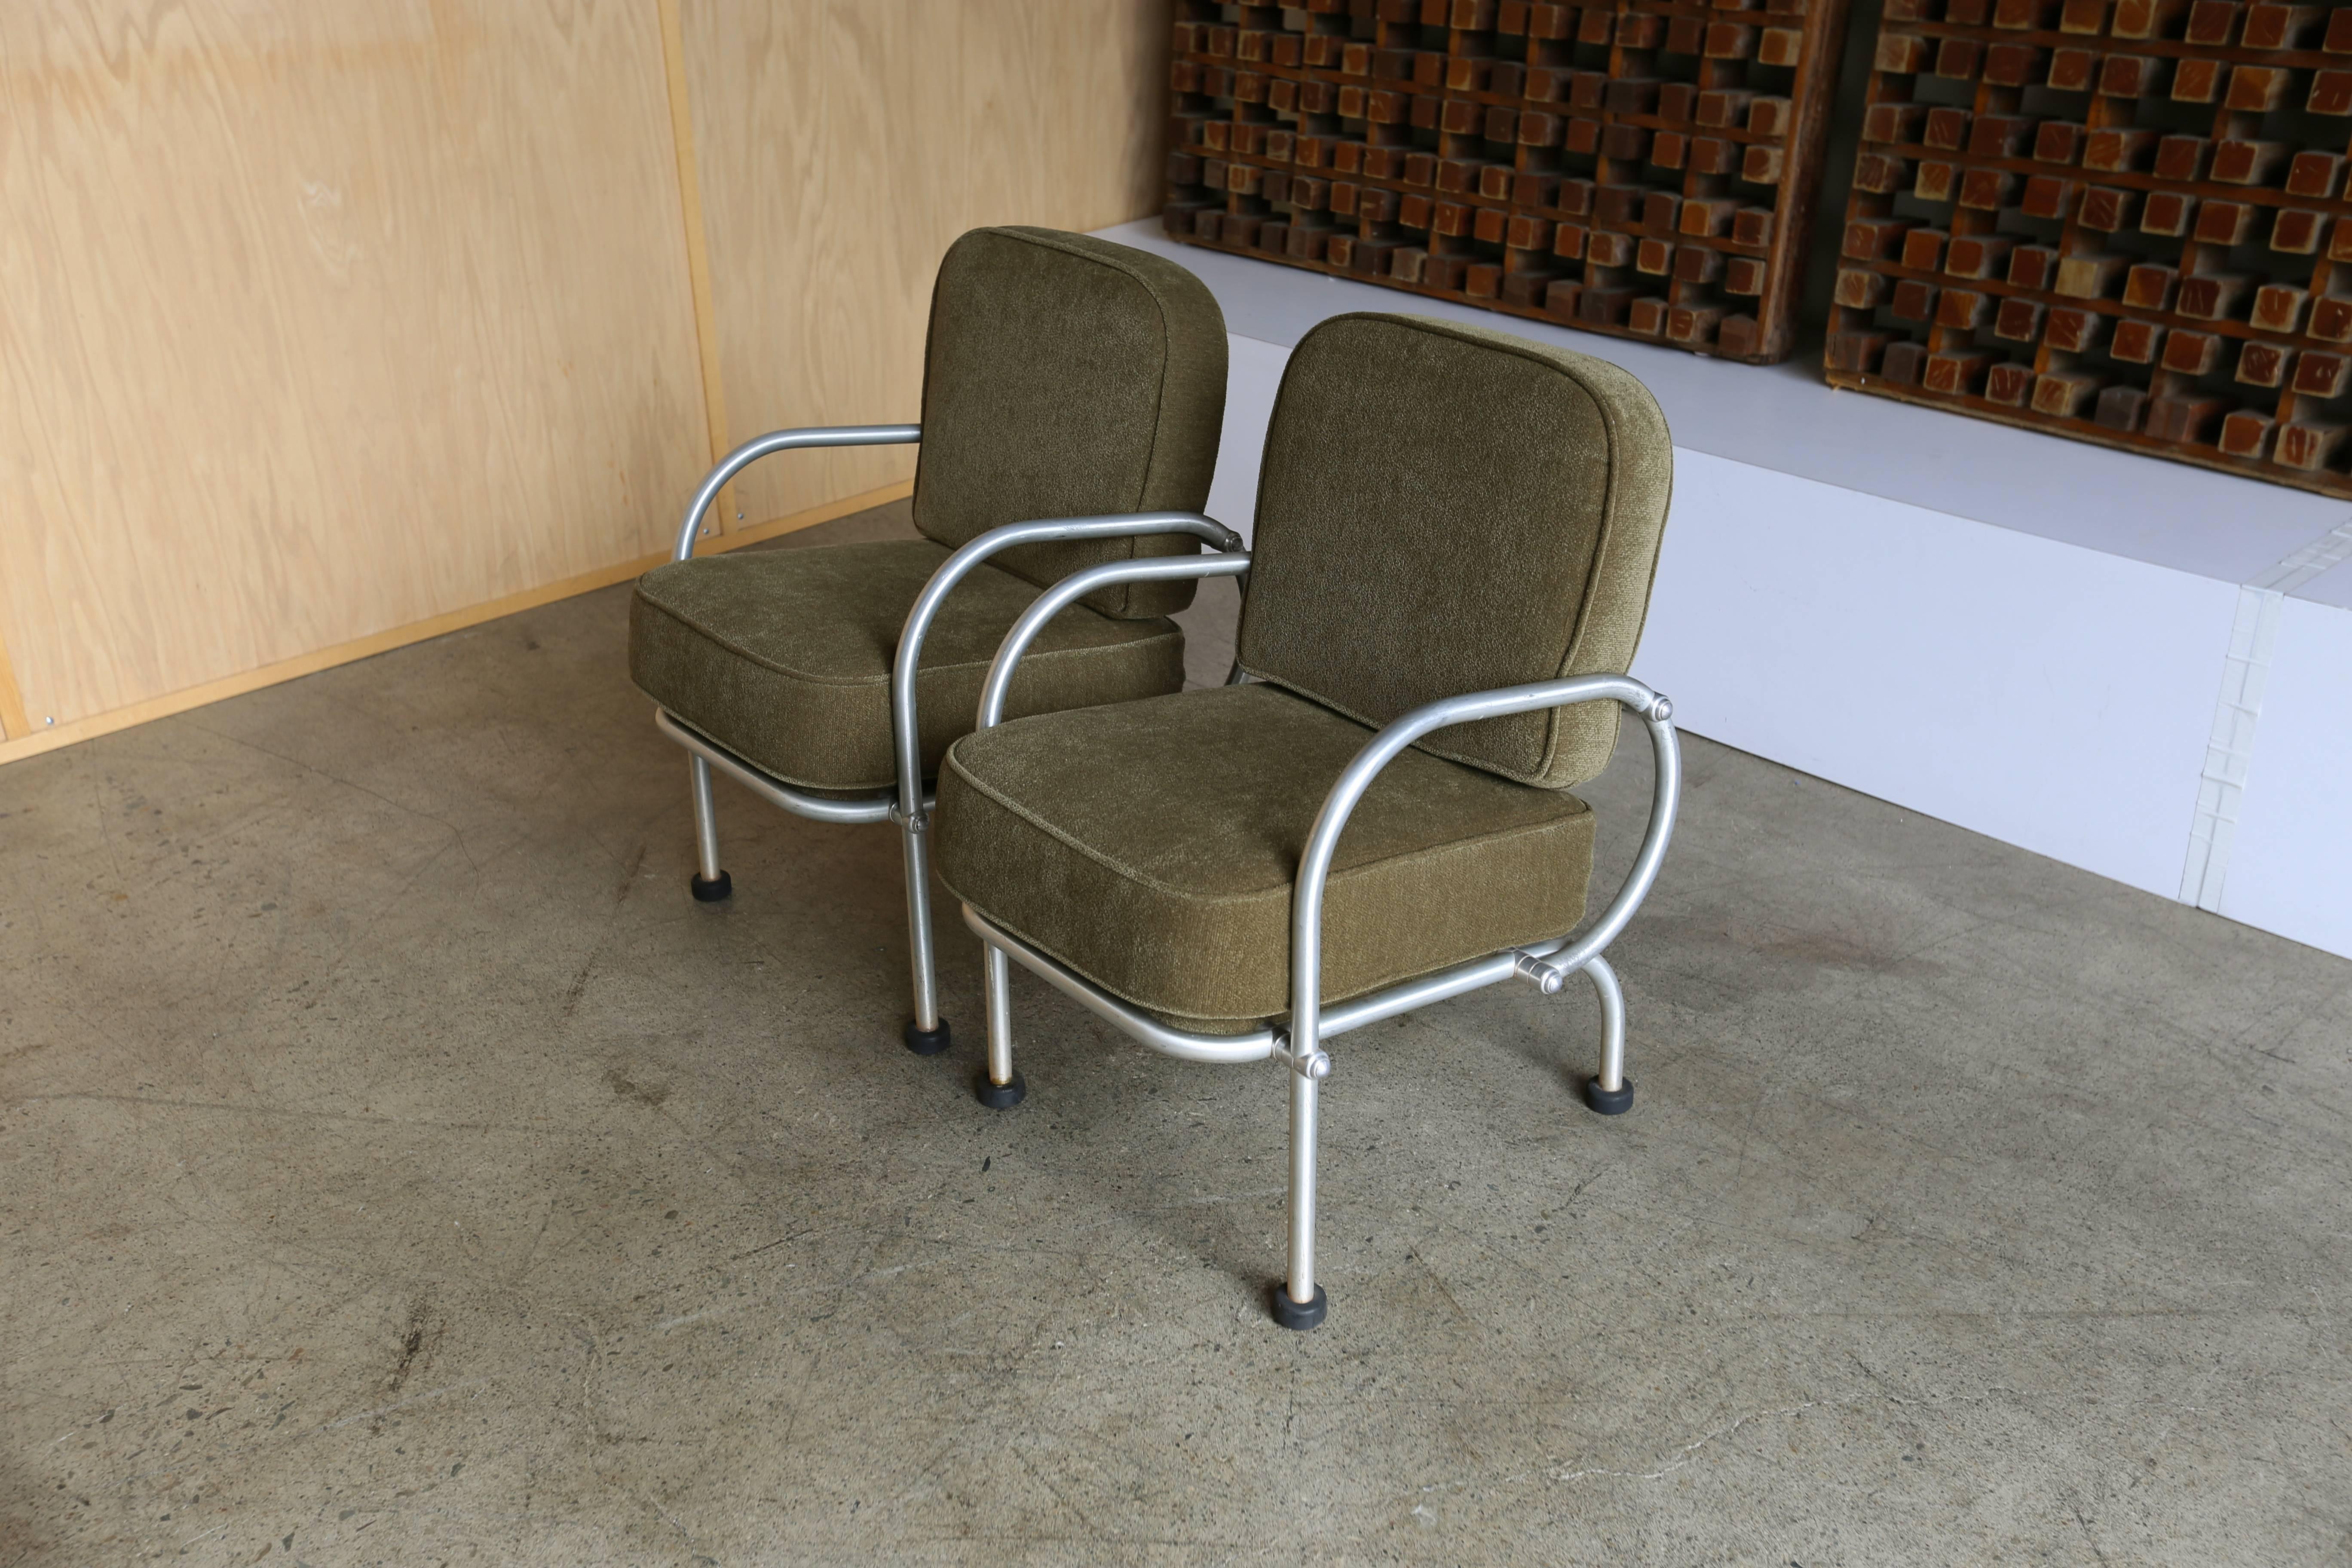 A pair of spun aluminum lounge chairs by Warren McArthur. New Maharam Scout olive upholstery.